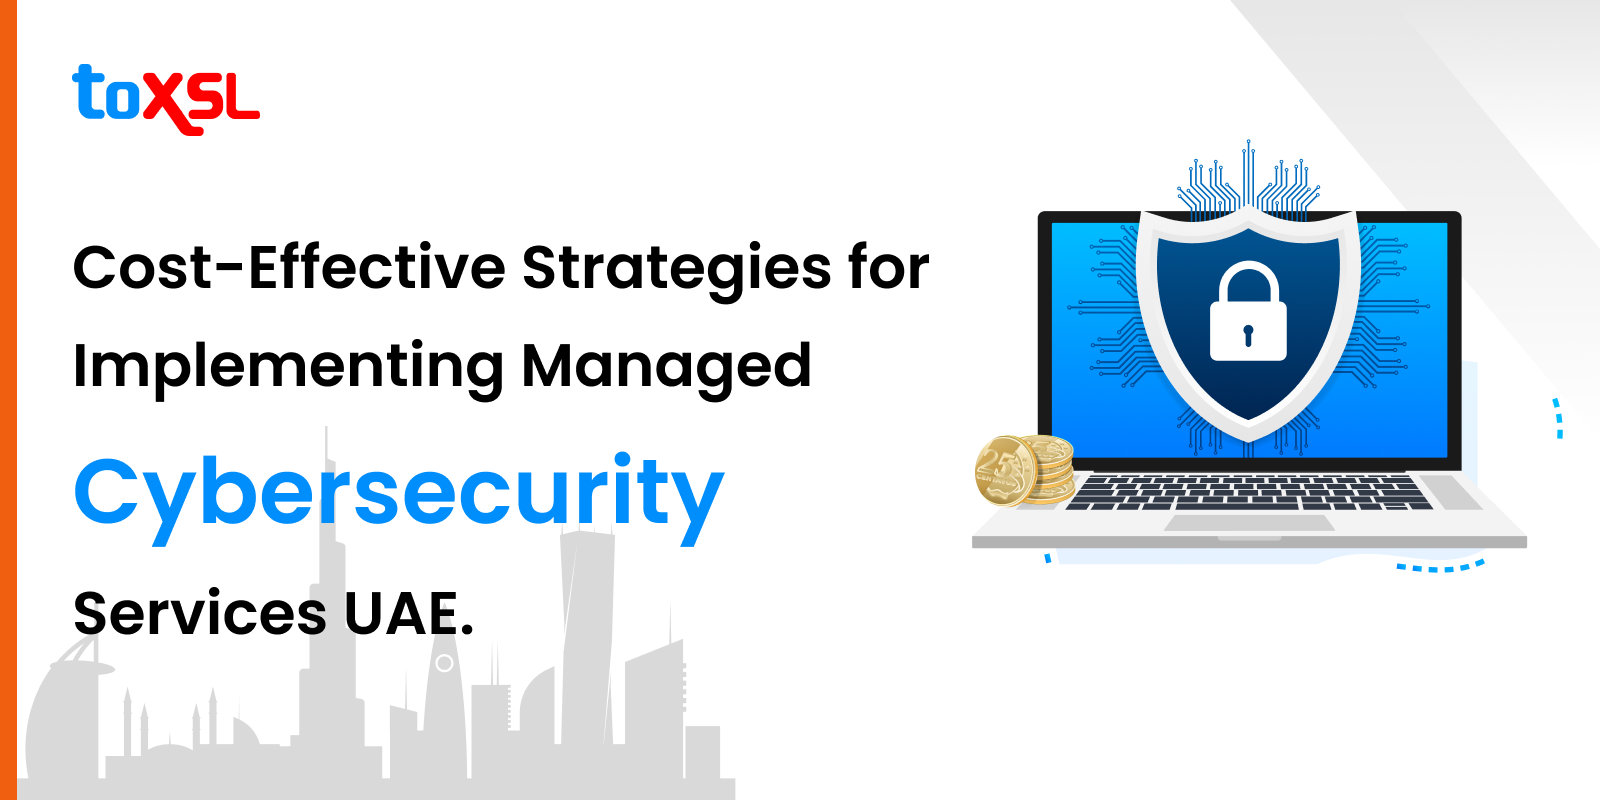 Cost-Effective Strategies for Implementing Managed Cybersecurity Services Dubai